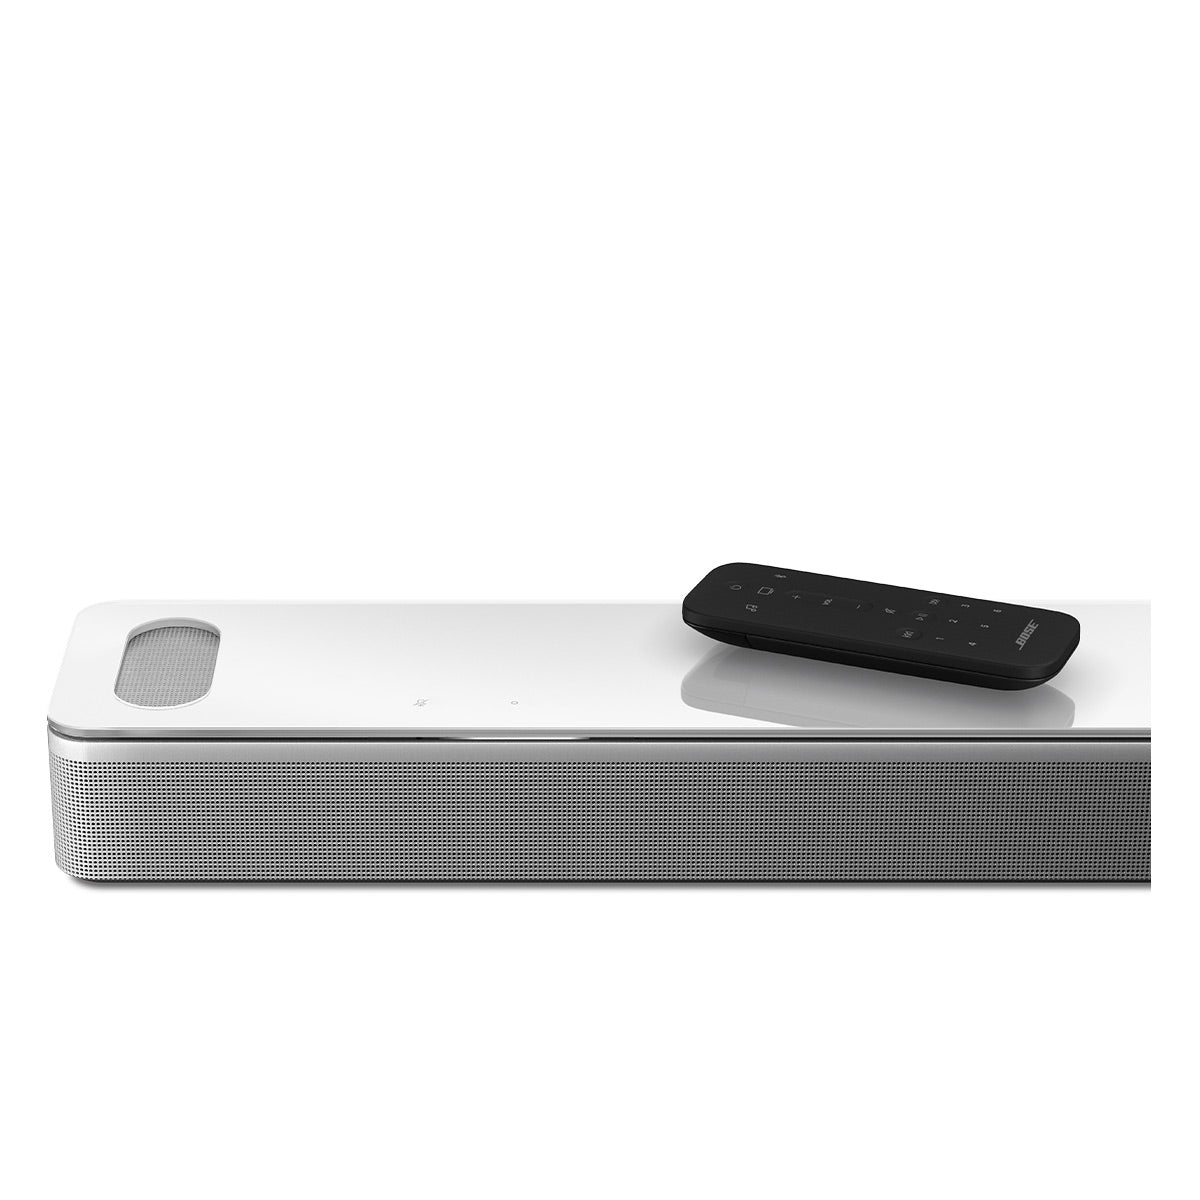 Bose Soundbar 900 Home Theater System with Bass Module 700 Subwoofer (White)